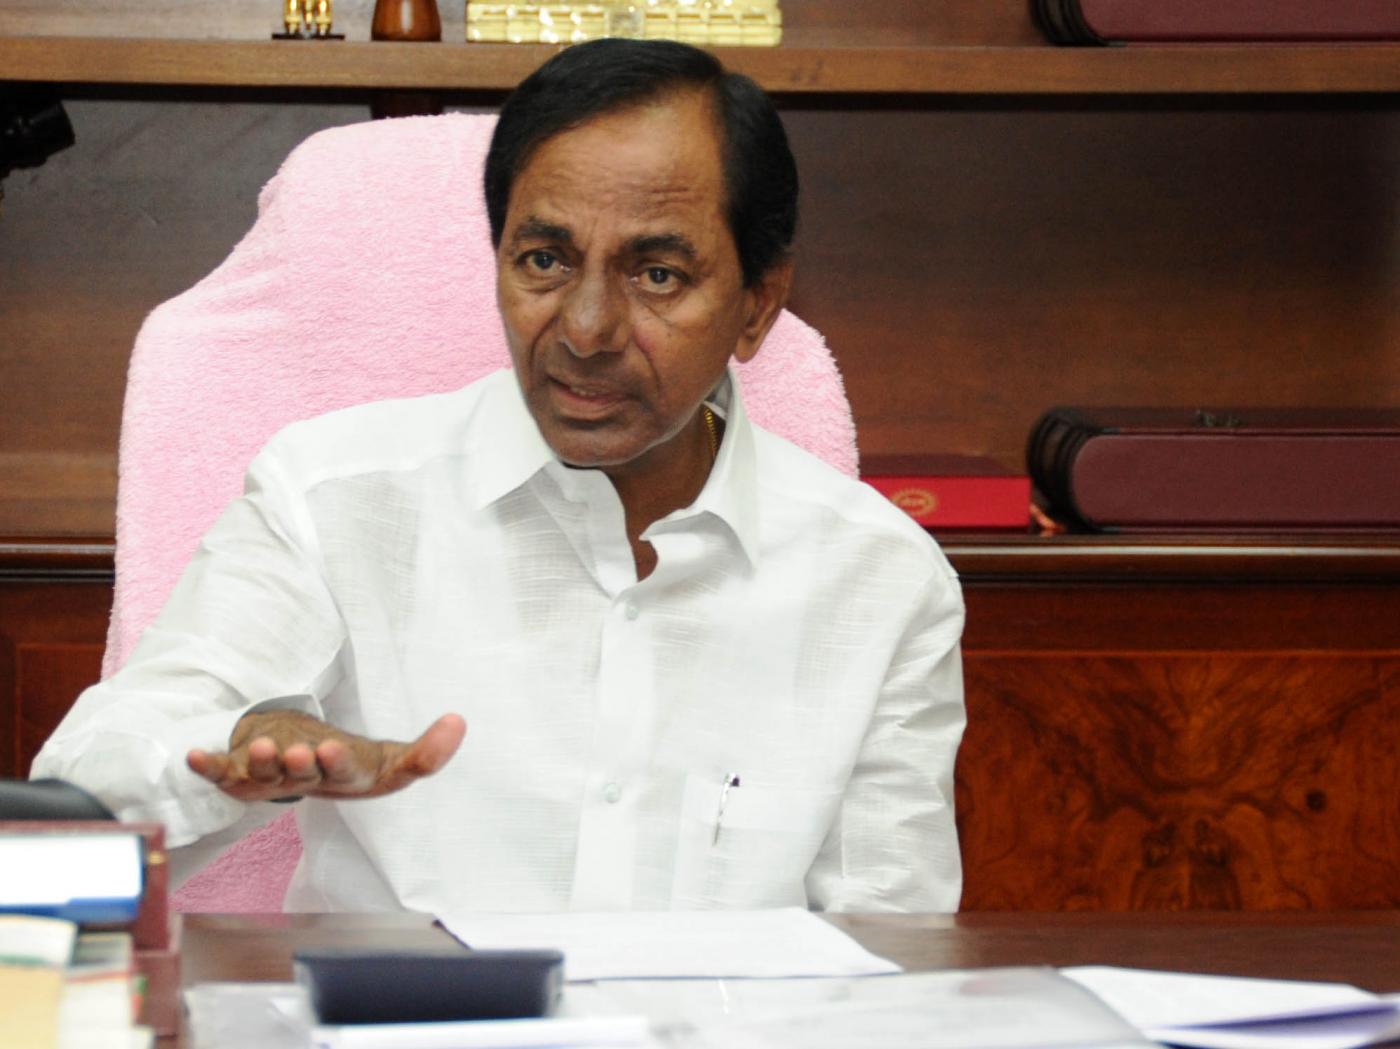 Hyderabad: Telangana Chief Minister K Chandrasekhar Rao addresses during a review meeting with the officials on supply of water to Mission Bhagiratha programme in Hyderabad on Sept 11, 2017. (Photo: IANS) by .